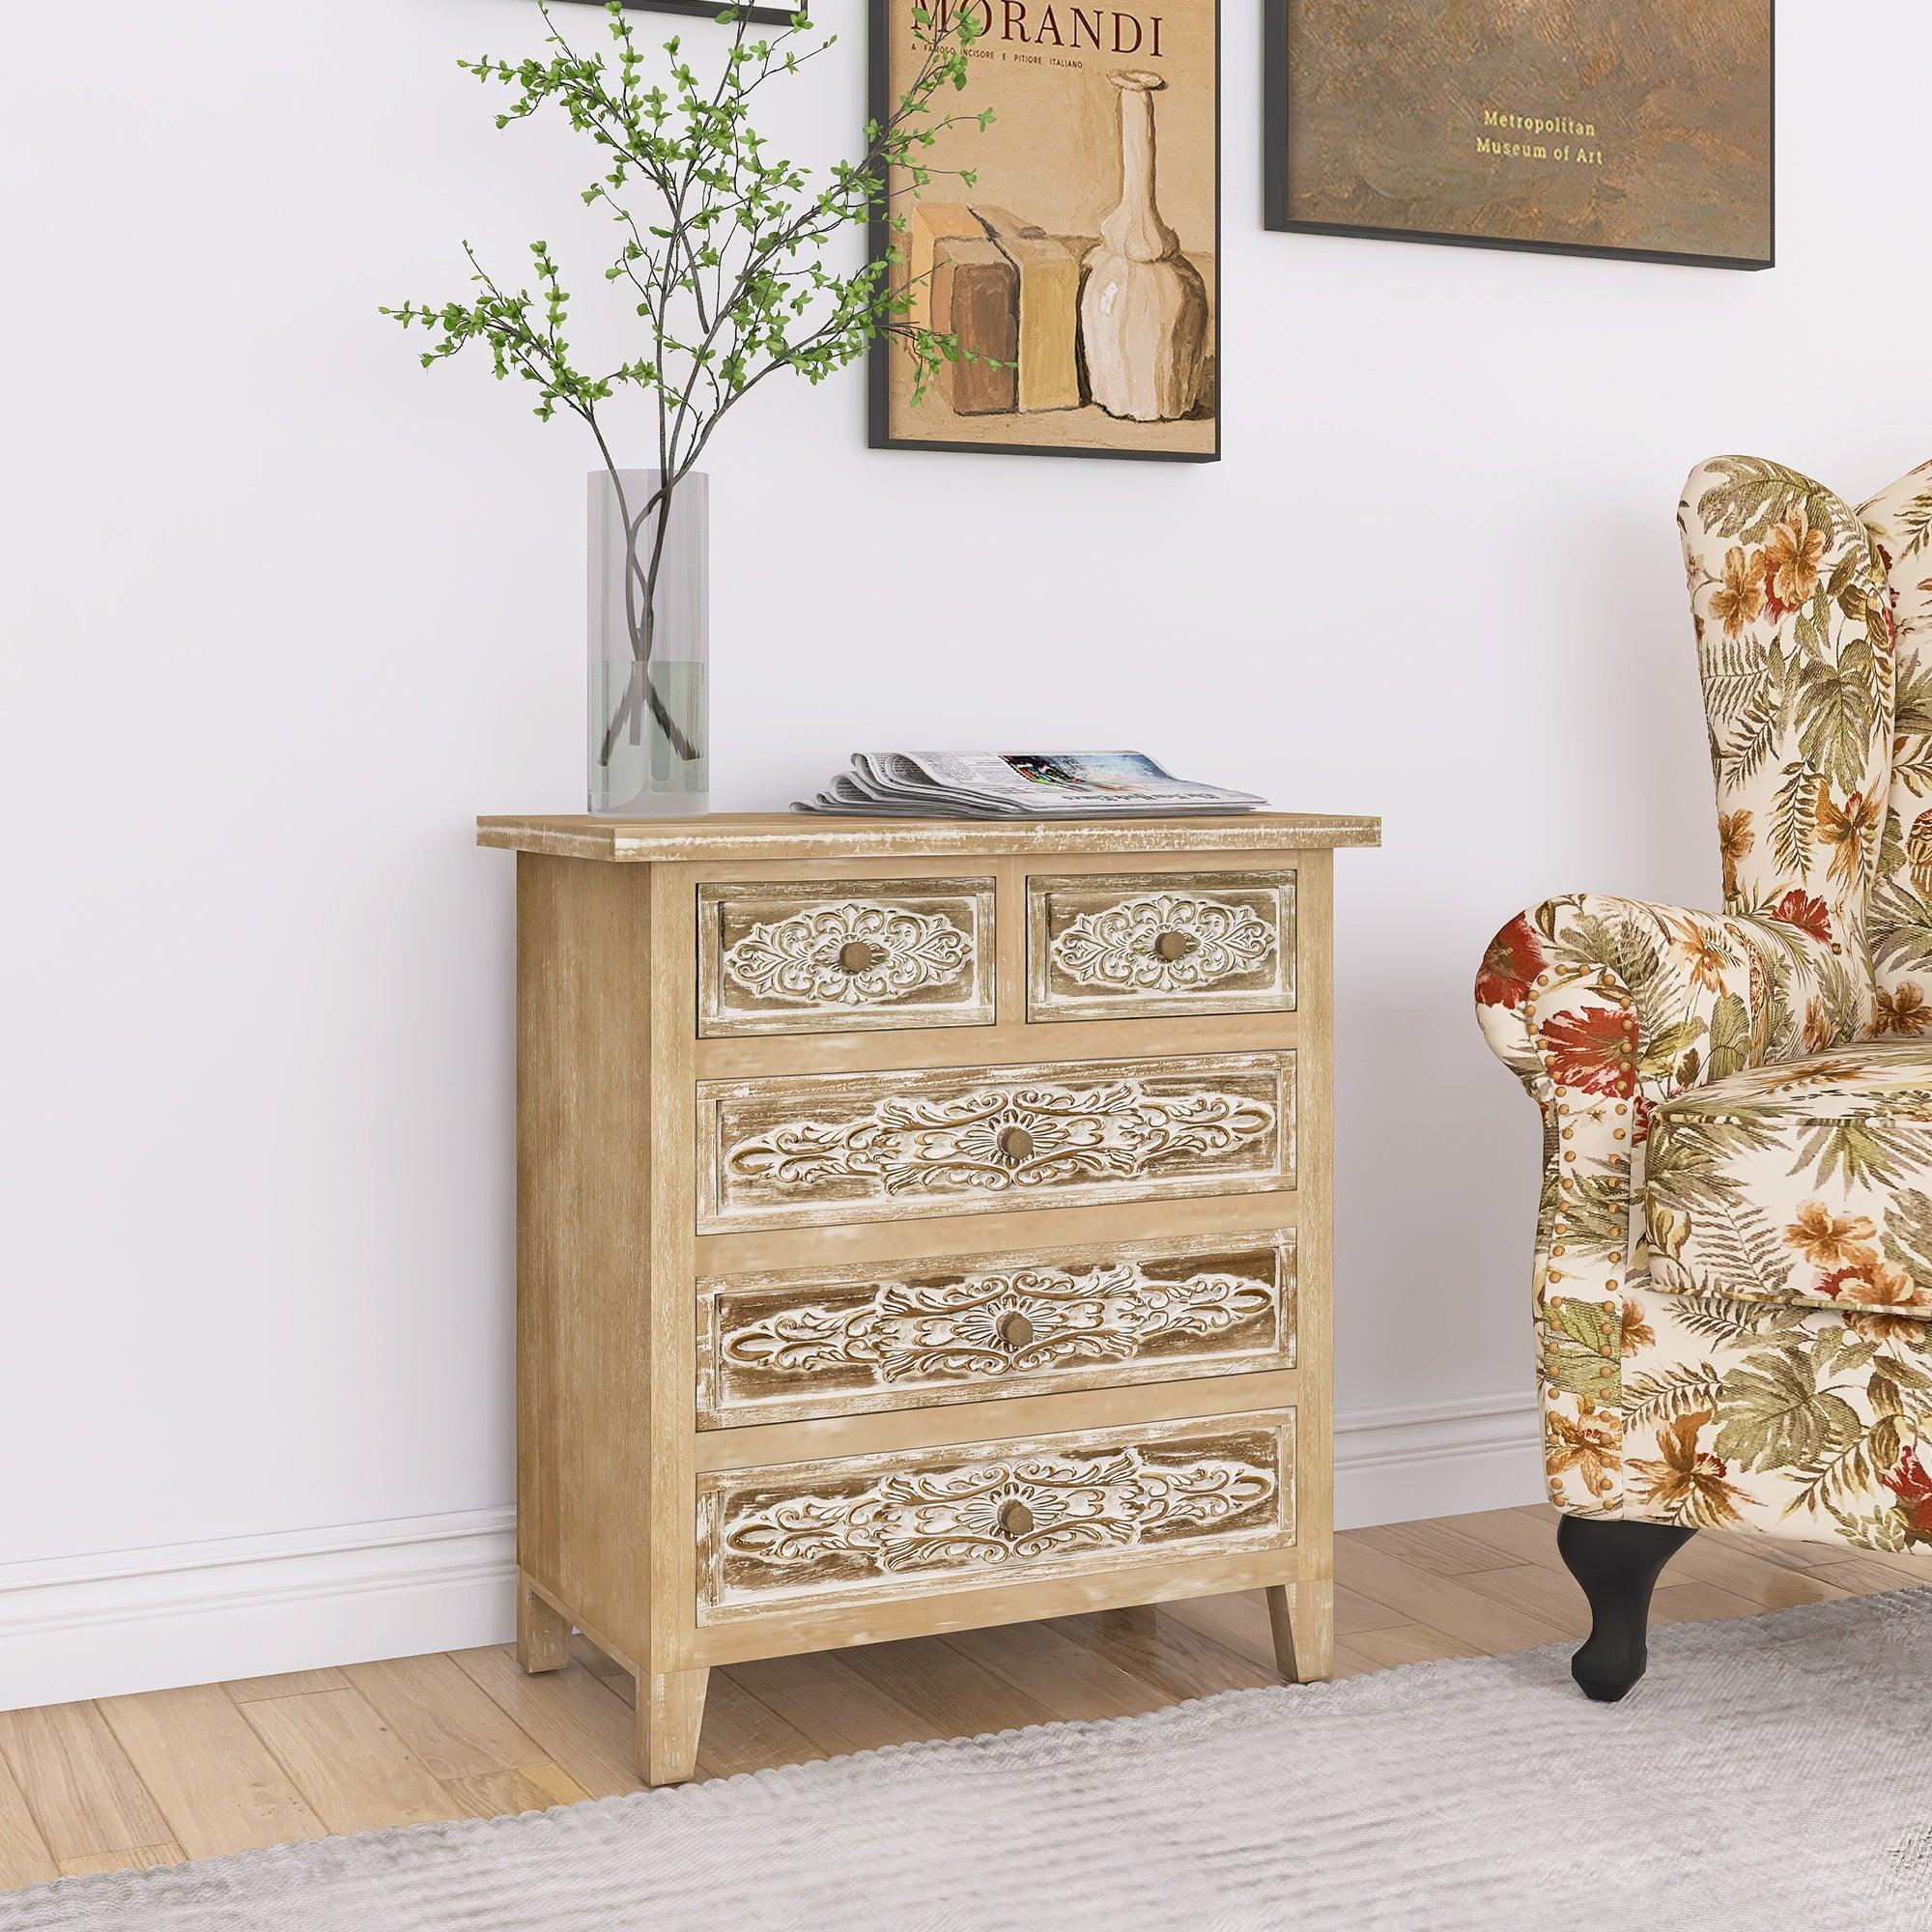 Hand-Carved Accent Drawer With 5 Drawers - Traditional Craftsmanship And Functionality Combined